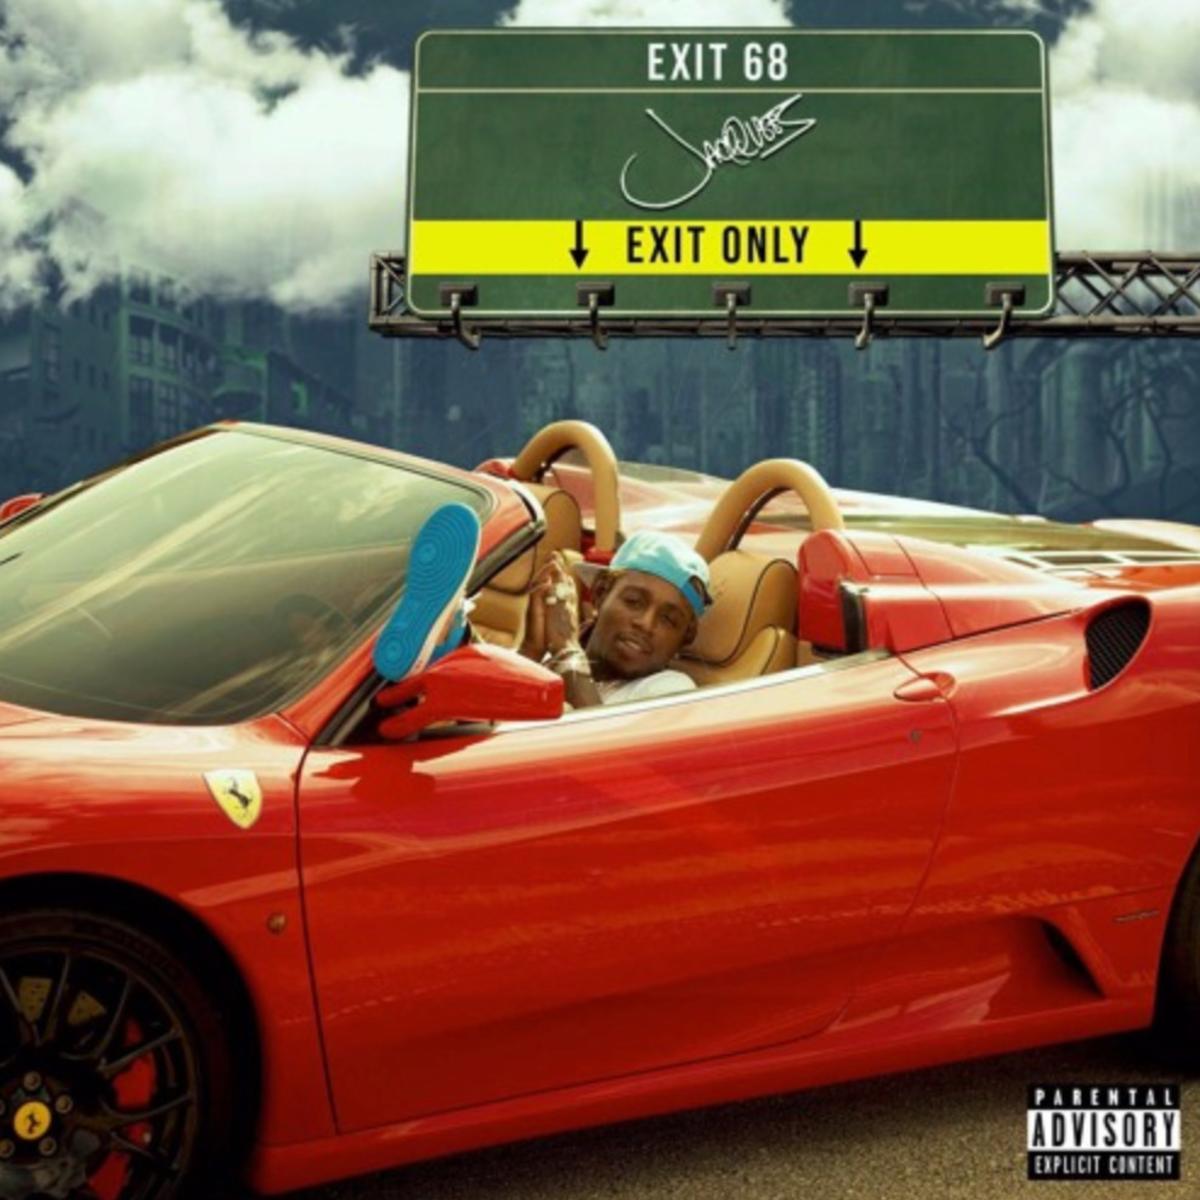 Jacquees Releases “Exit 68” Mixtape